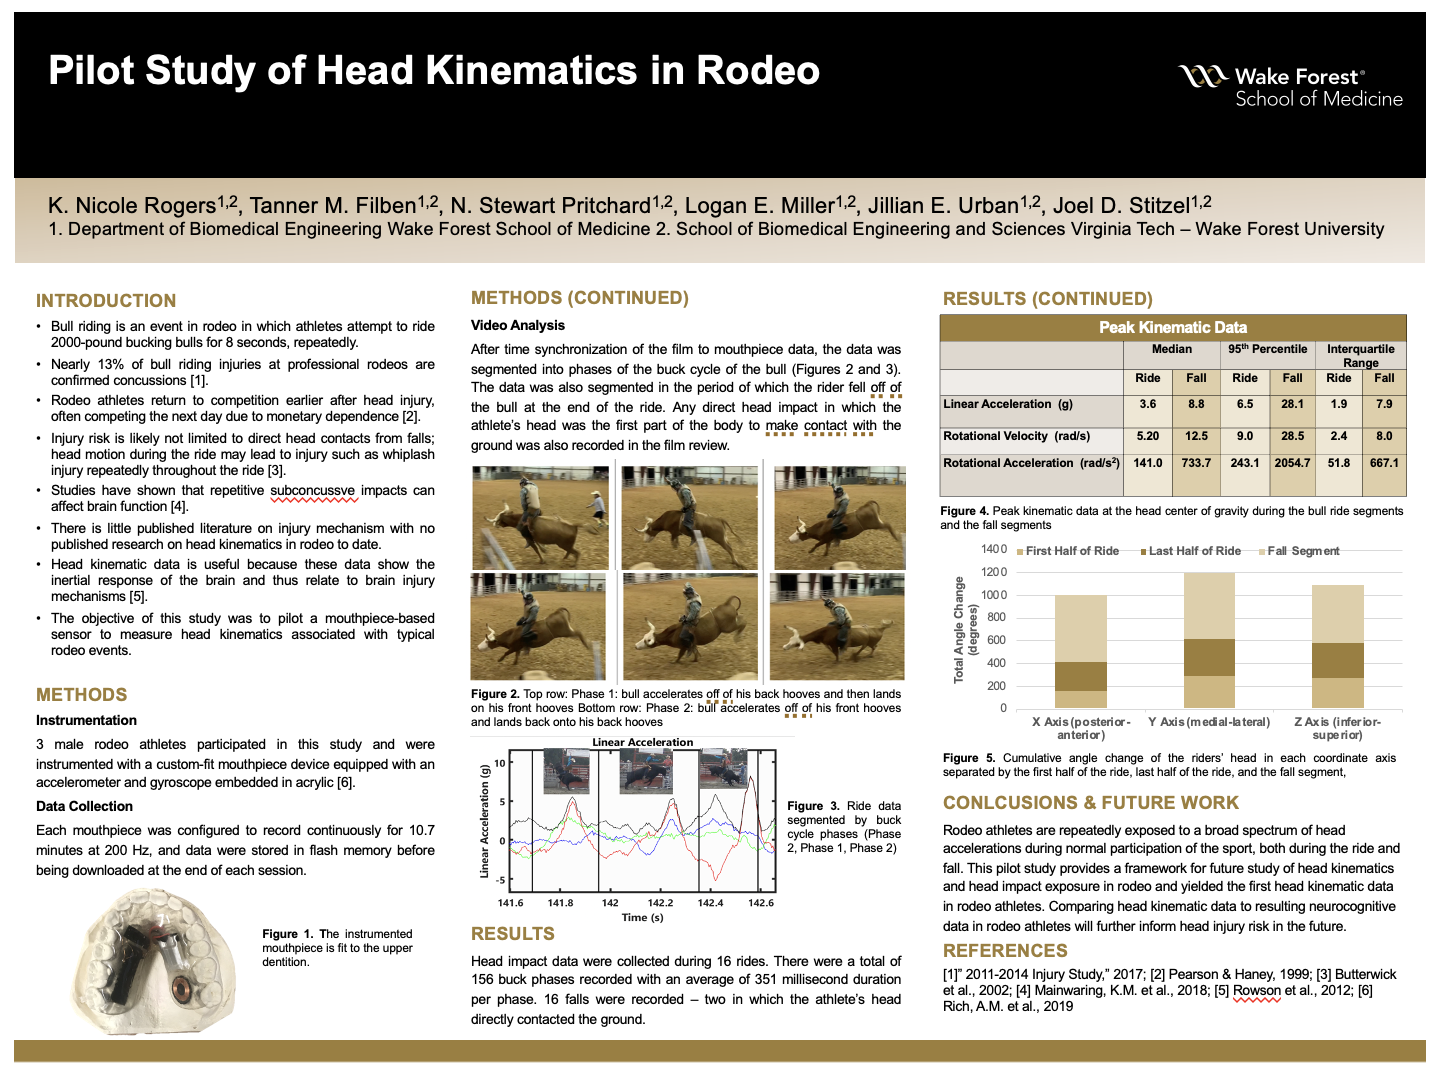 Showcase Image for Pilot Study of Head Kinematics in Rodeo 